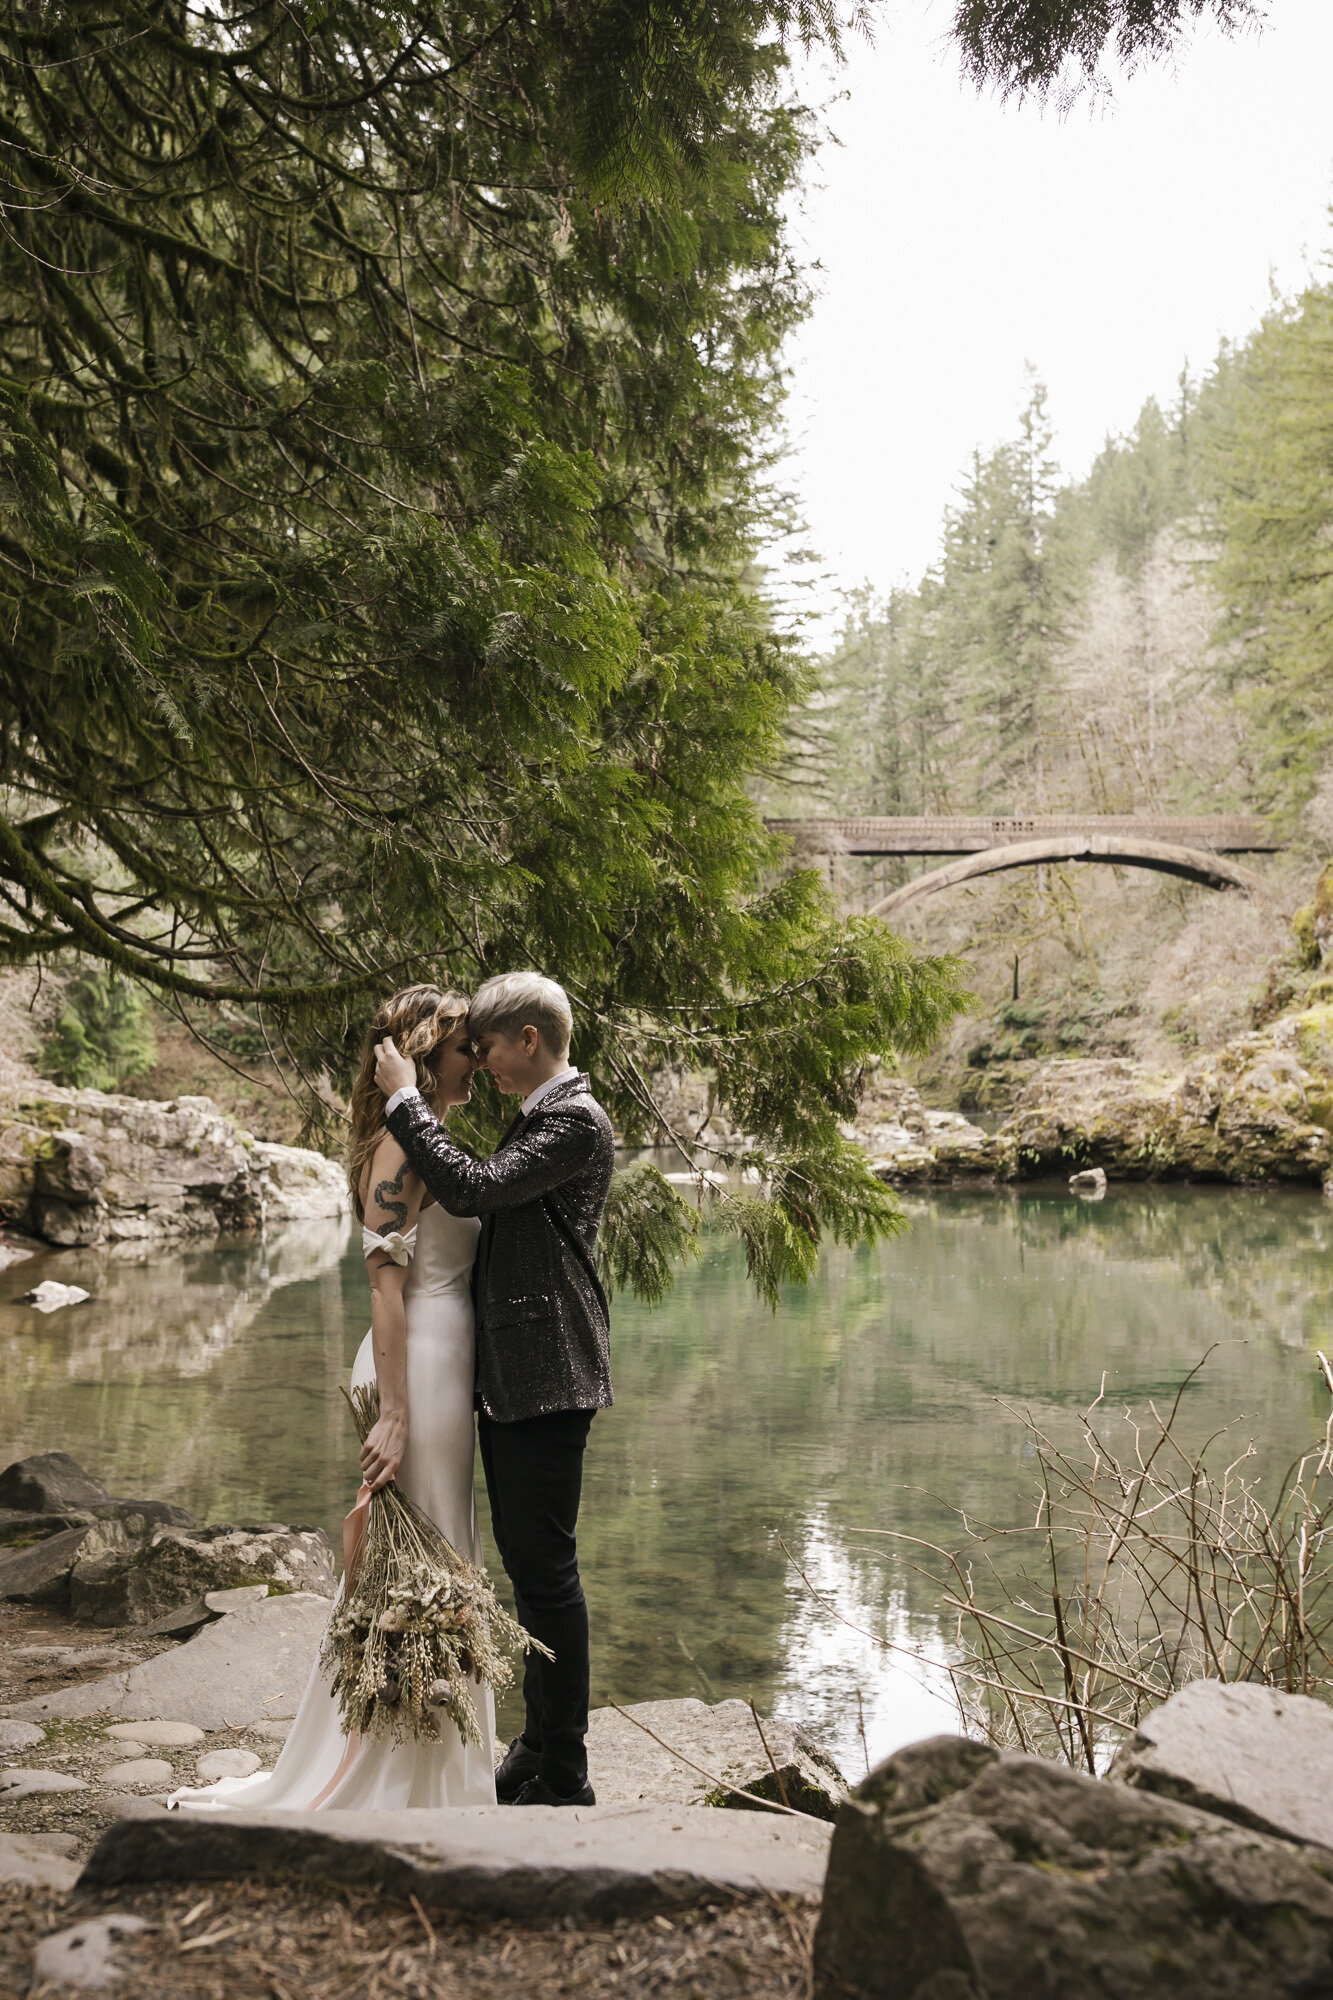 Same sex couple elope in a Washington forest along a river